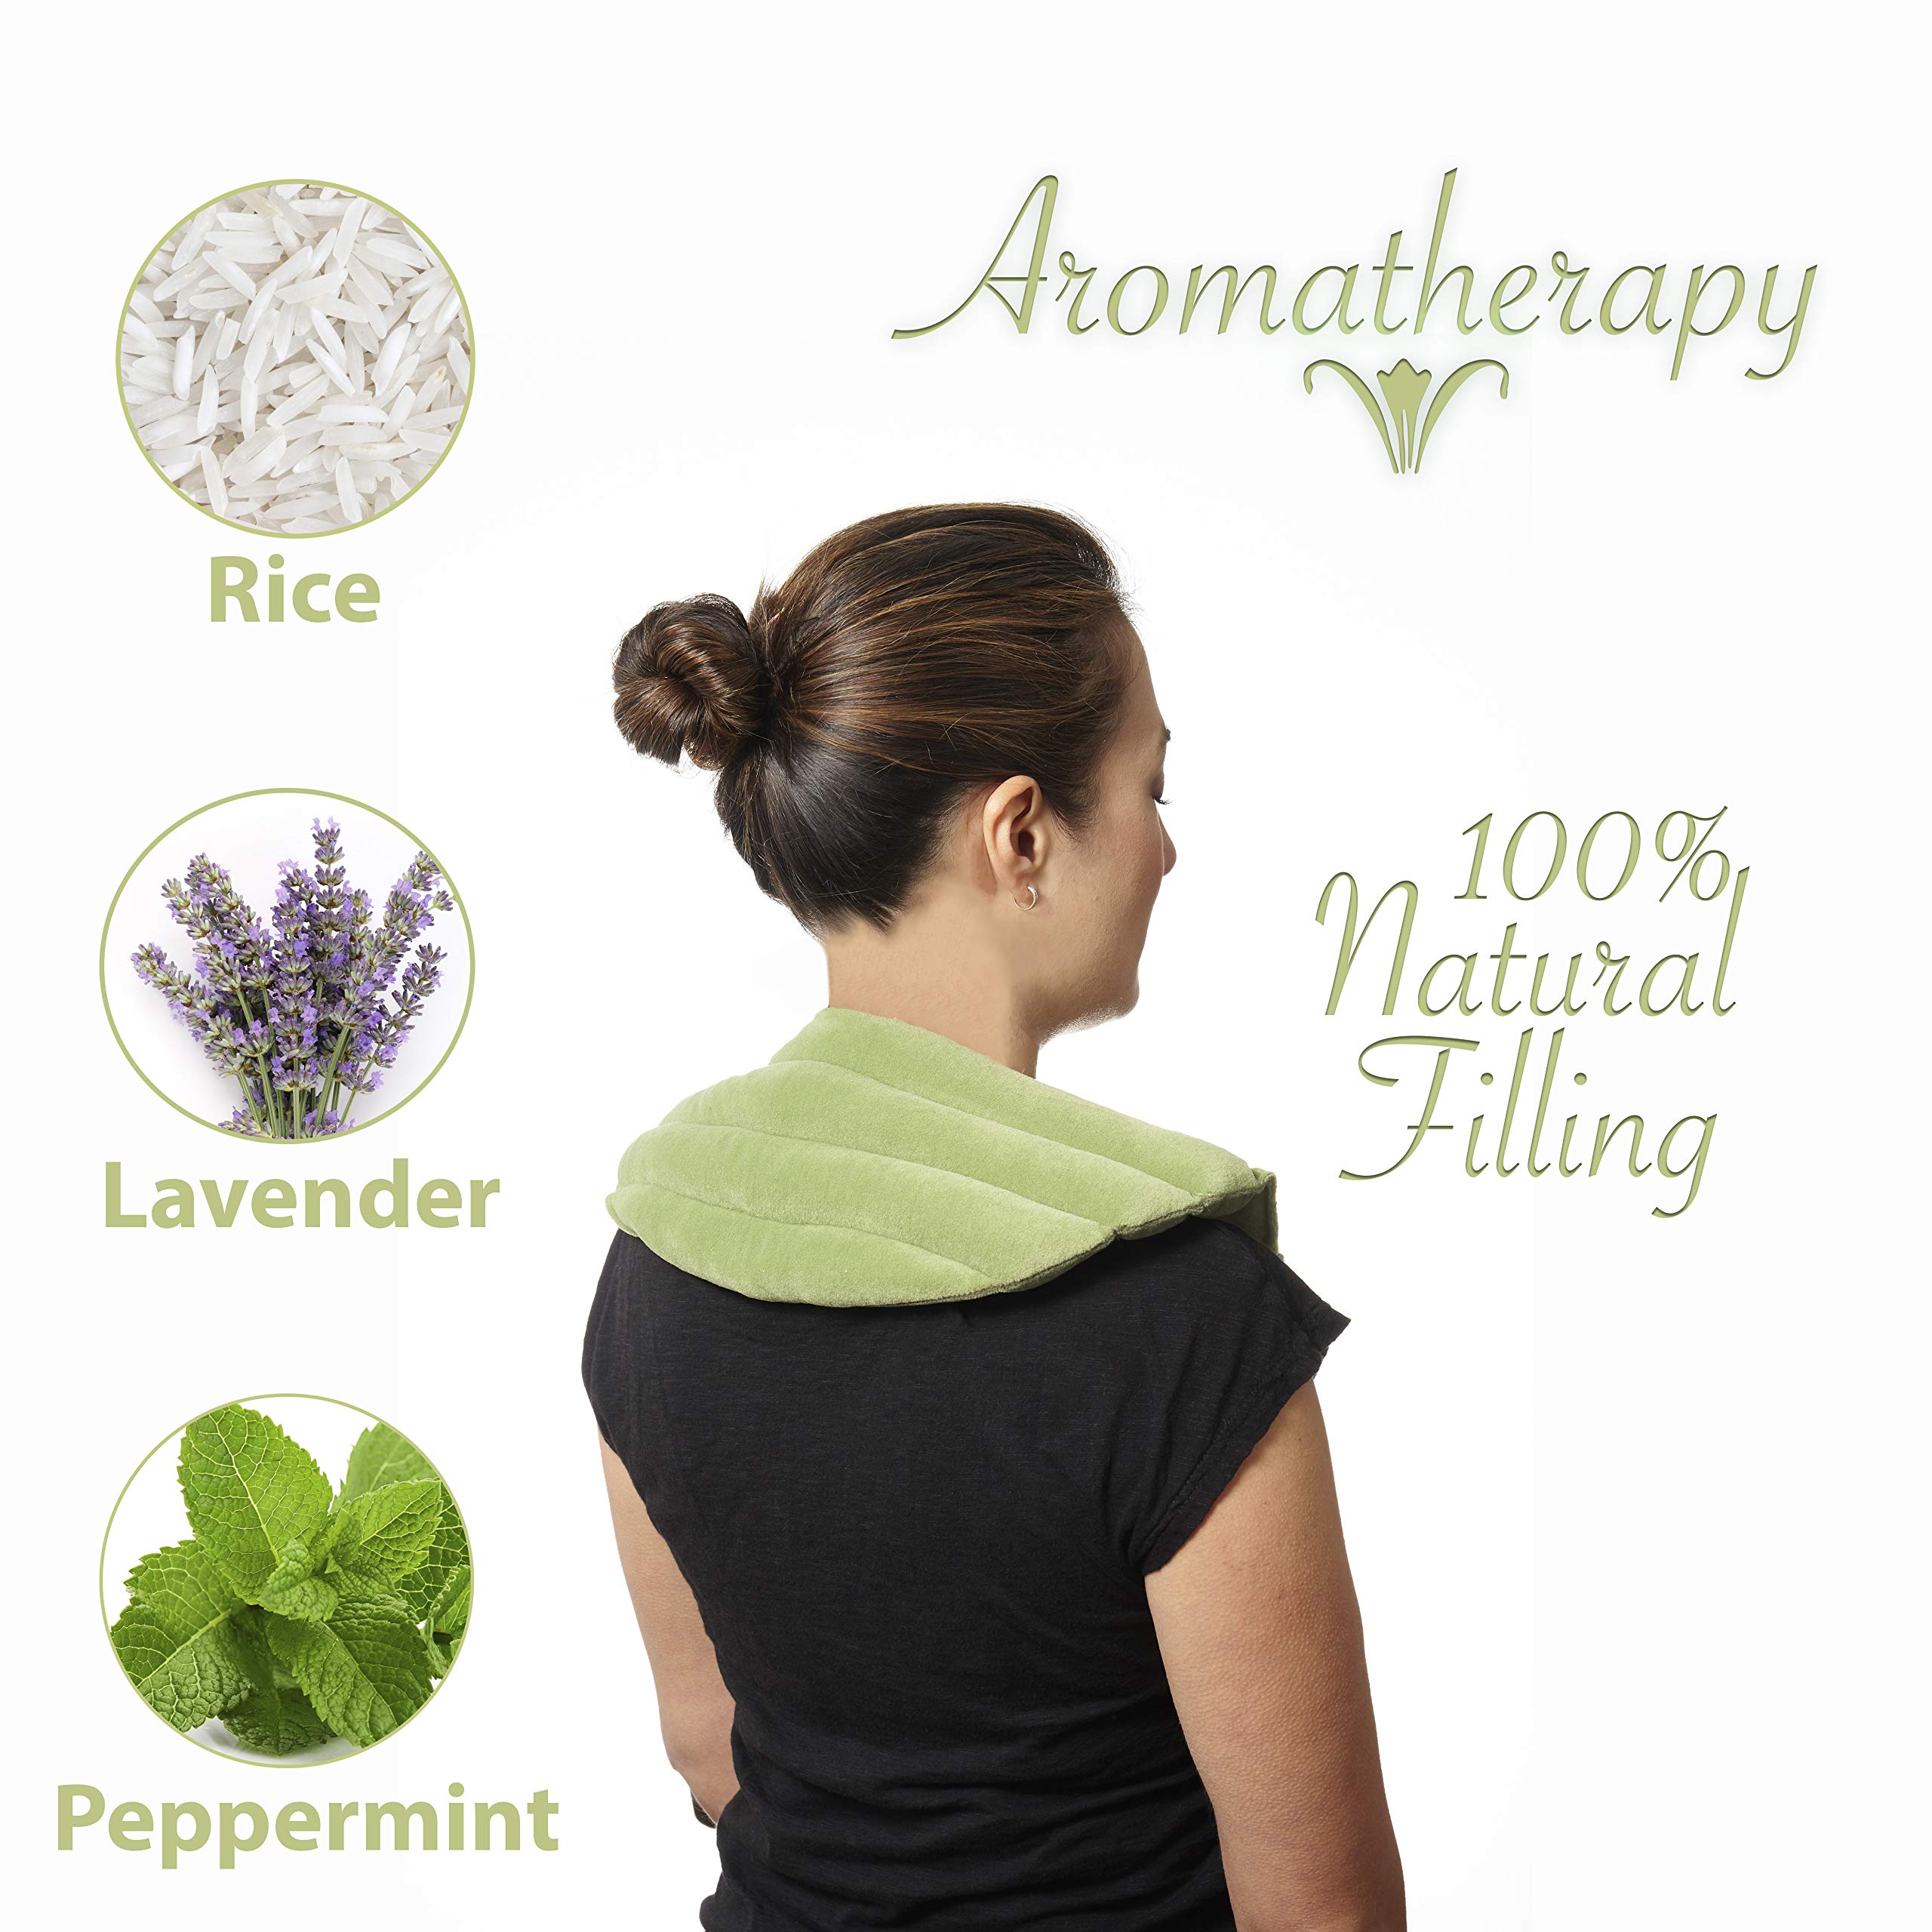 DreamTime Spa Comforts Microwaveable Shoulder Wrap with Aromatherapy, Neck Shoulder Relaxer, Hot or Cold Neck Wrap Lavender and Peppermint Herbal Stress Relief, Green